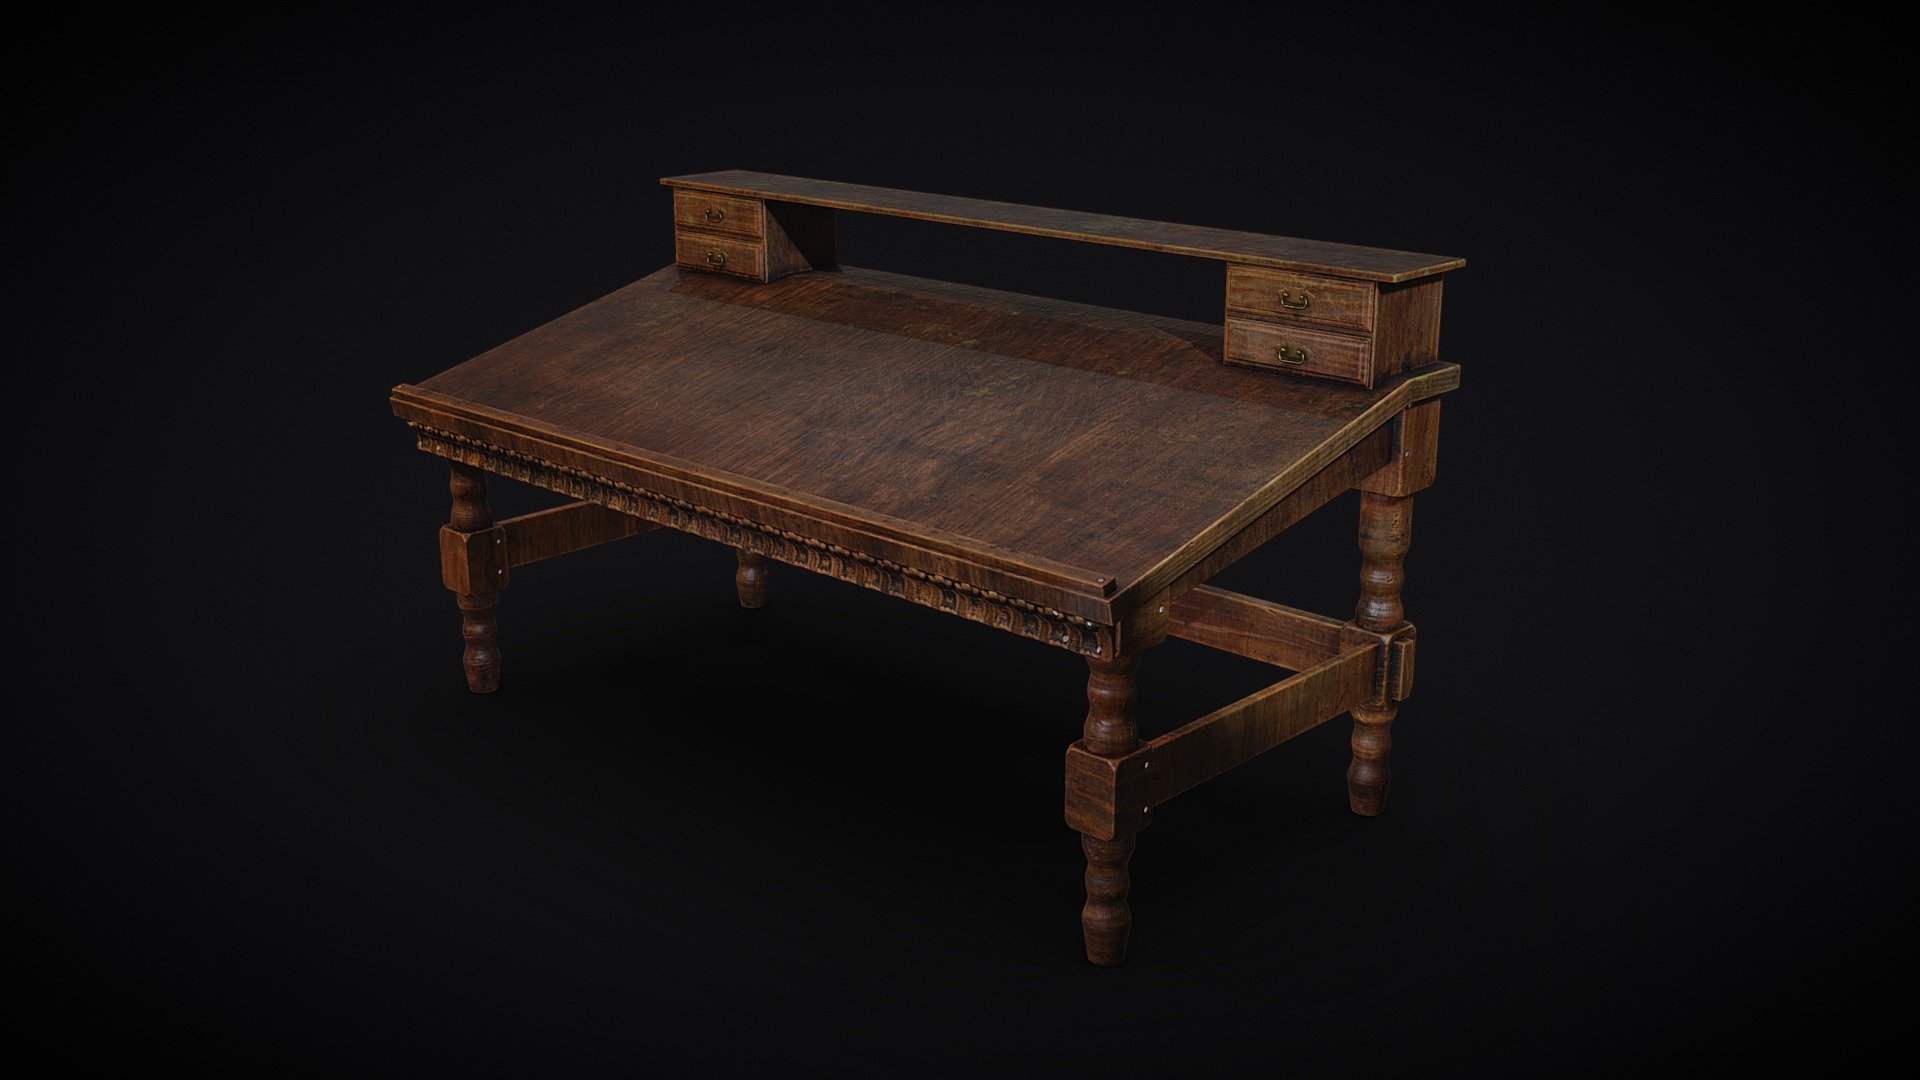 Free to everyone to use for anything. All I ask is that you consider me for your projects! 
You can contact me at artdmitriyk@gmail.com - Medieval Writing Desk - Download Free 3D model by Dmitriy Korotkov (@ArtDmitriyK) 3d model